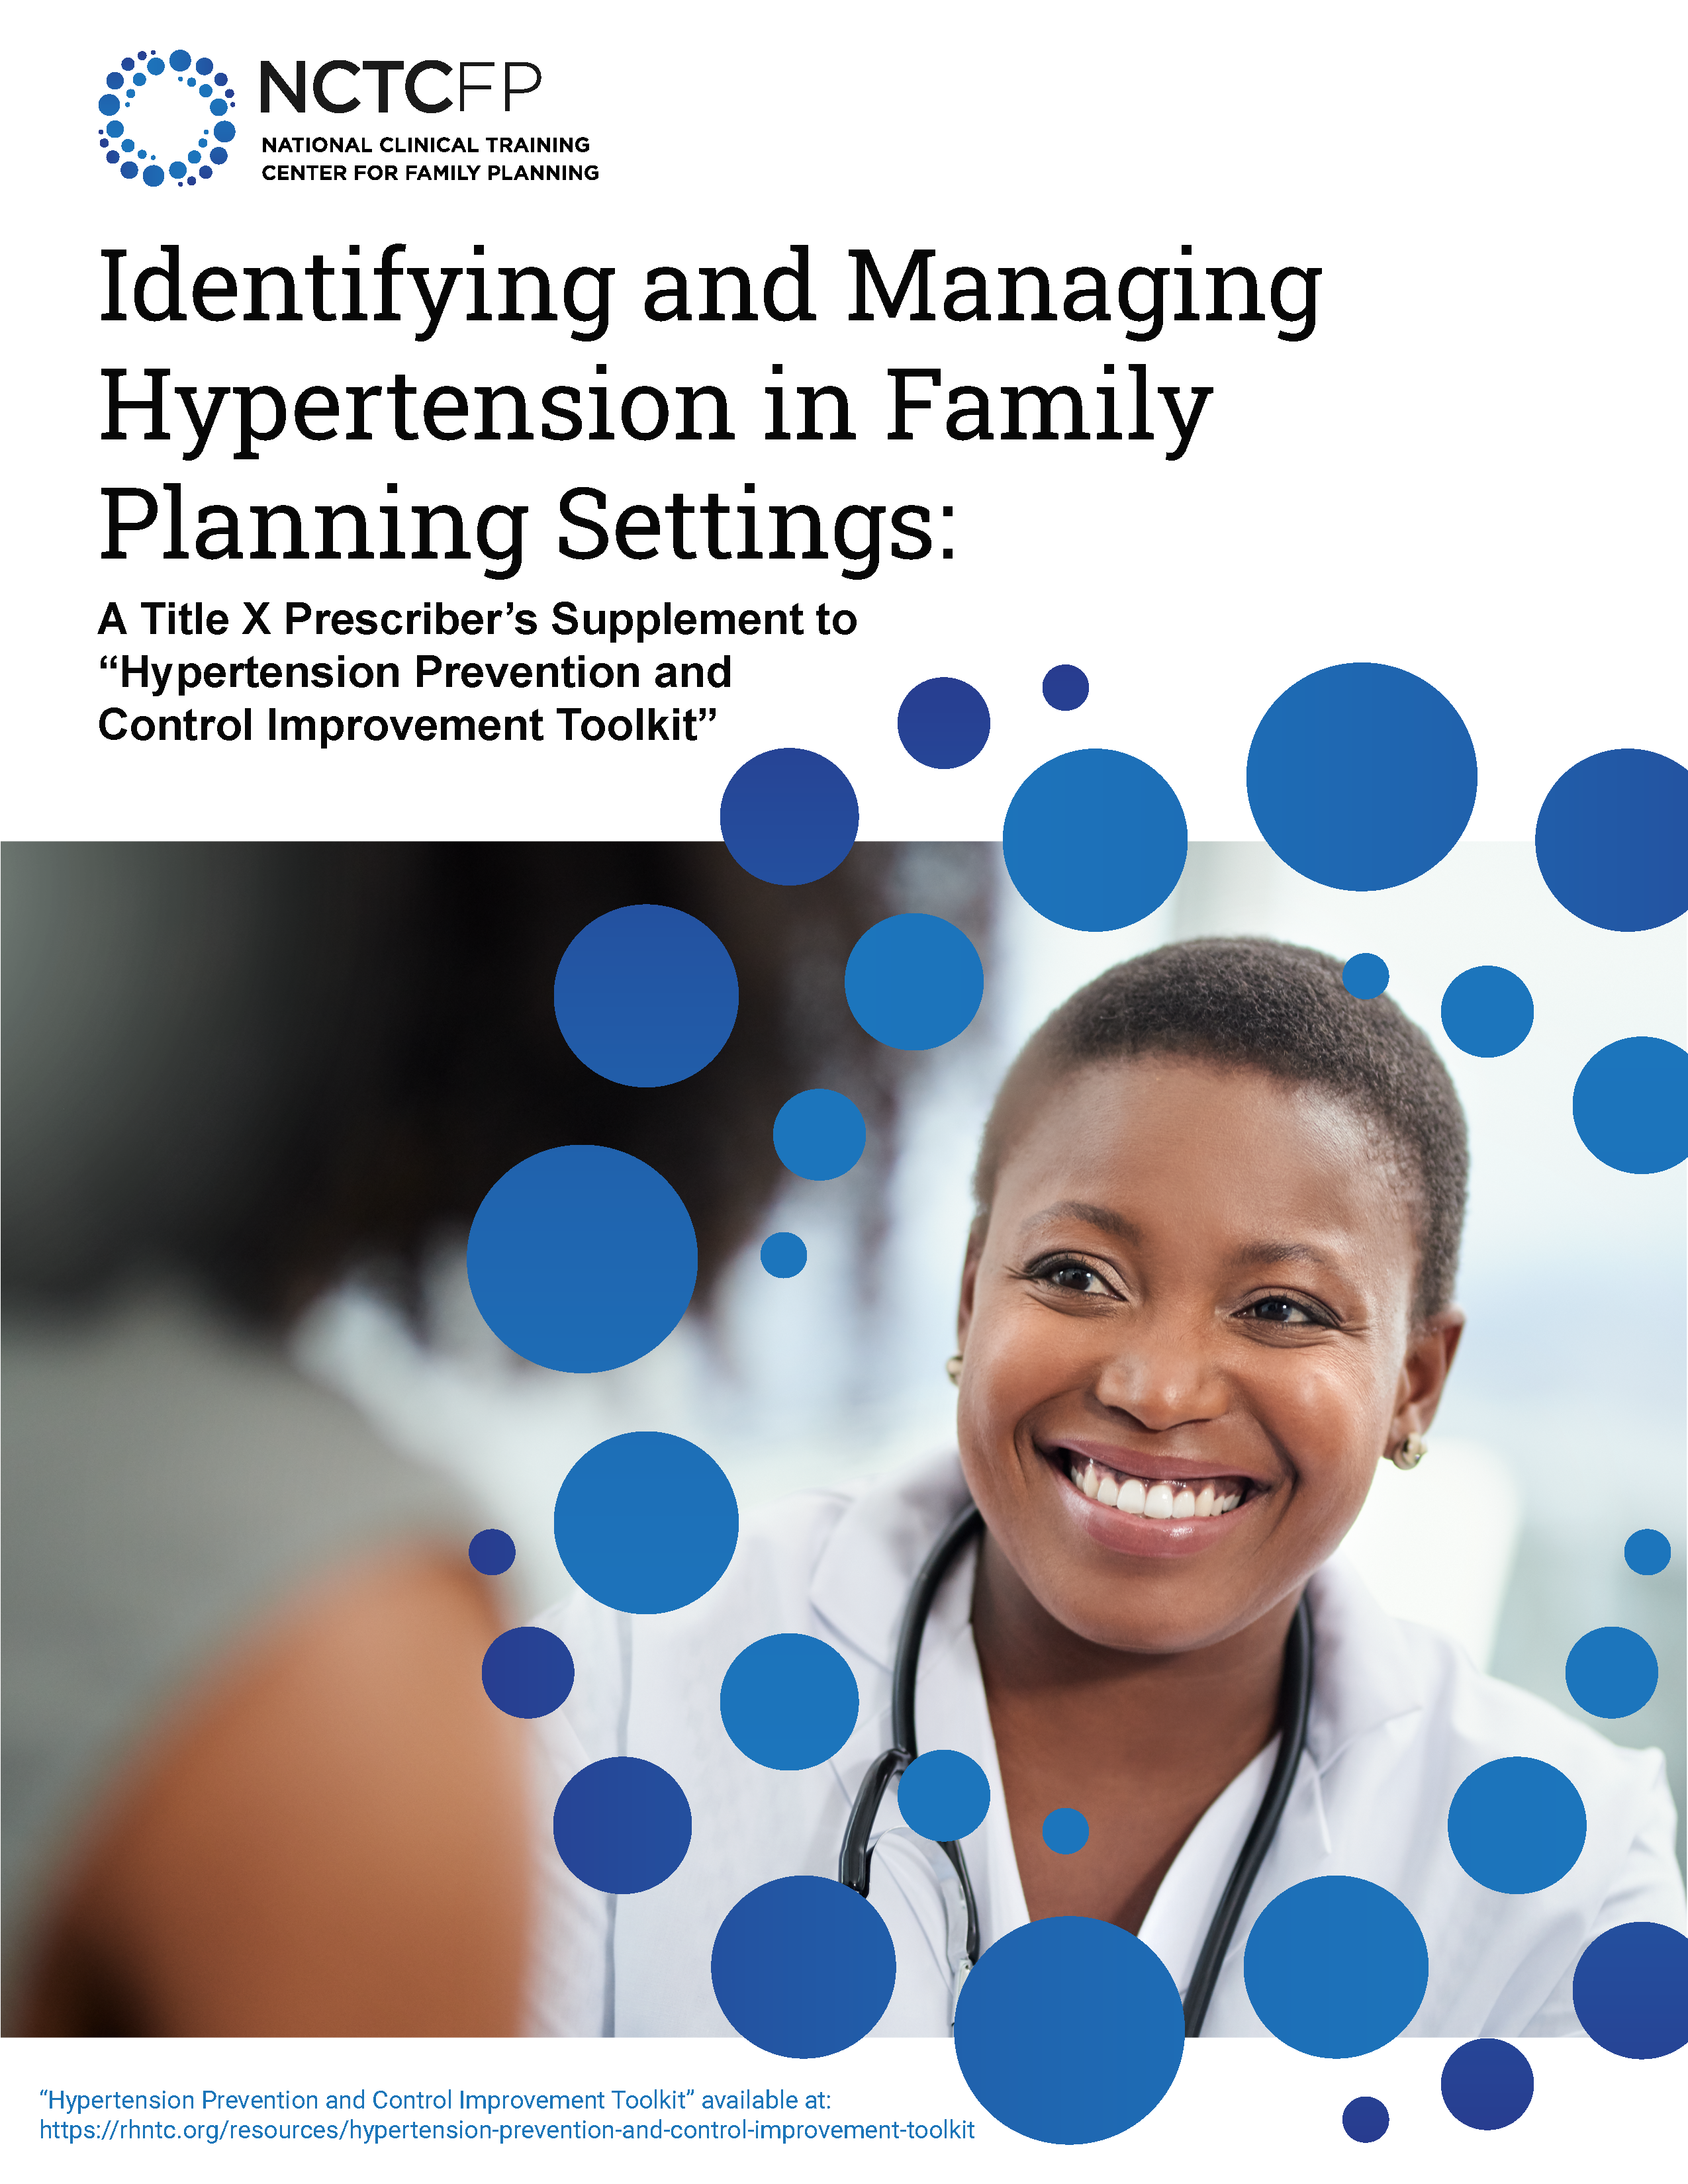 NCTCFP Identifying and Managing Hypertension in Family Planning Settings Prescribers Toolkit Page 01